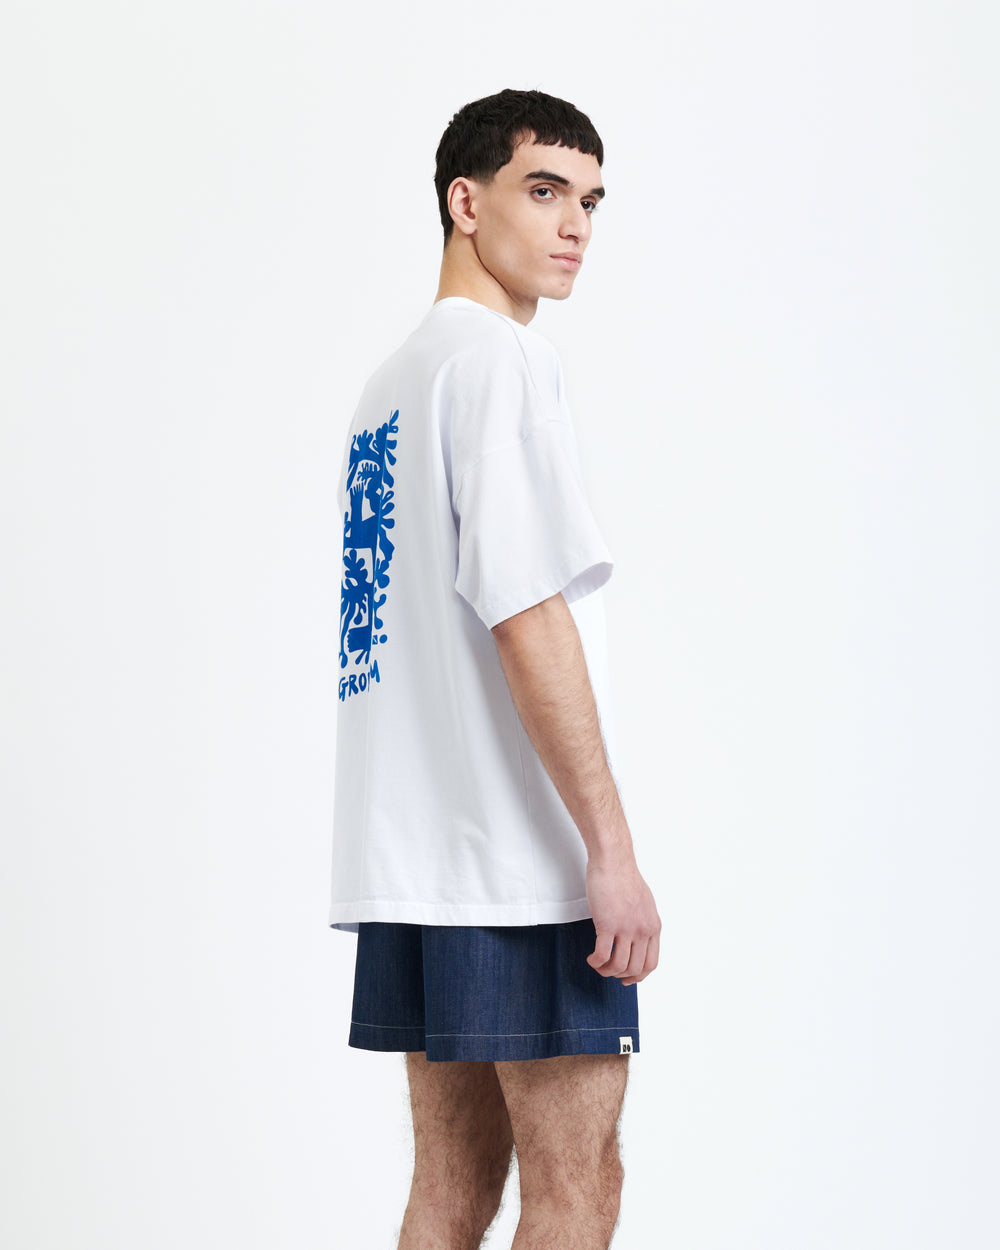 New Optimist menswear Spiaggia | Relaxed T-shirt 'Grow Optimism' T-shirt